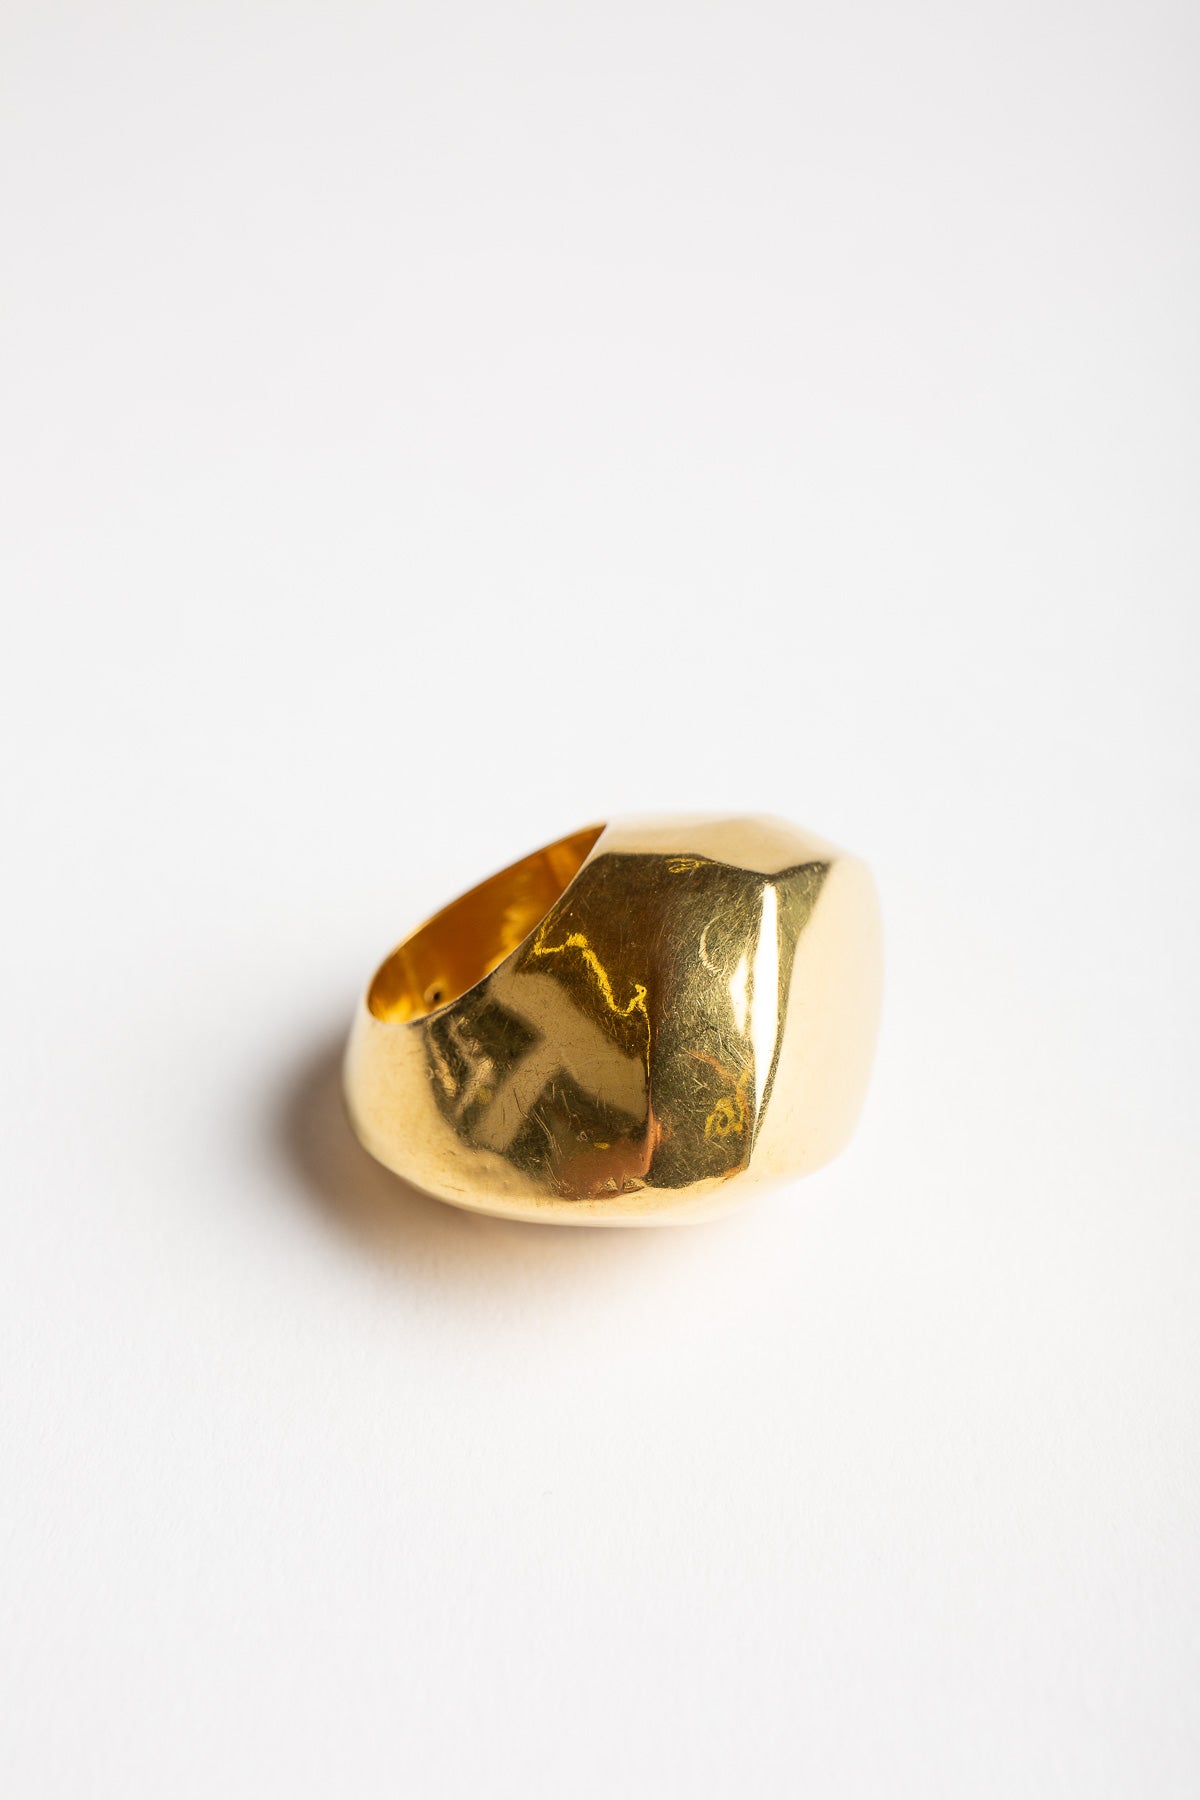 MAXFIELD PRIVATE COLLECTION | 1970'S MODERNIST 18K RING